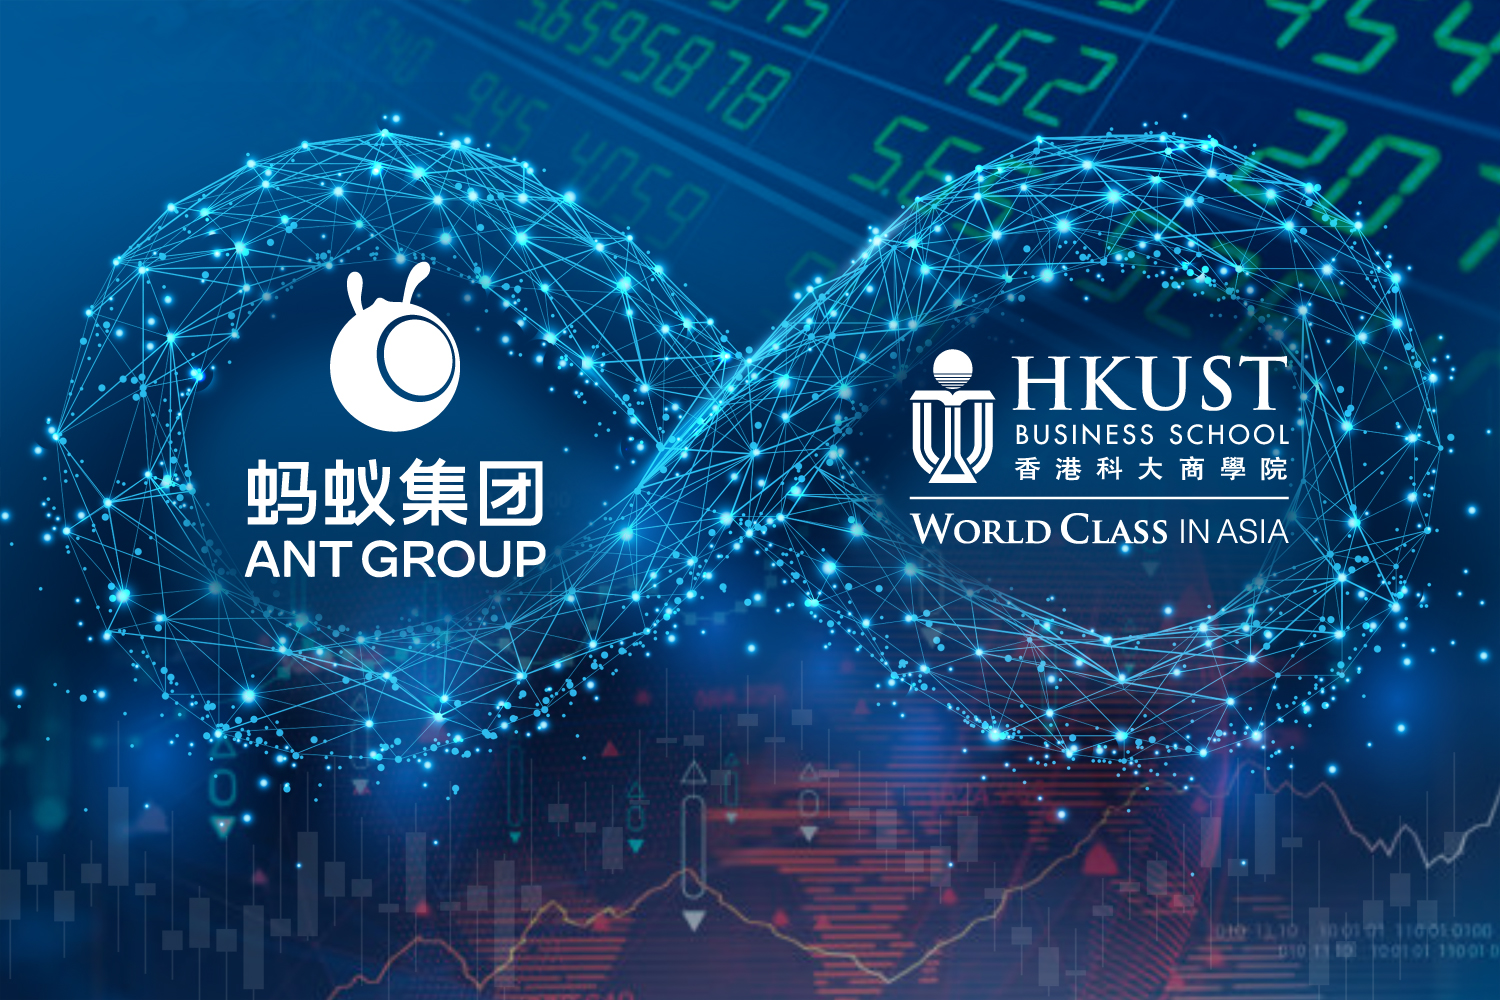 HKUST and Ant Group Sign MoU on Fintech Talent Development 